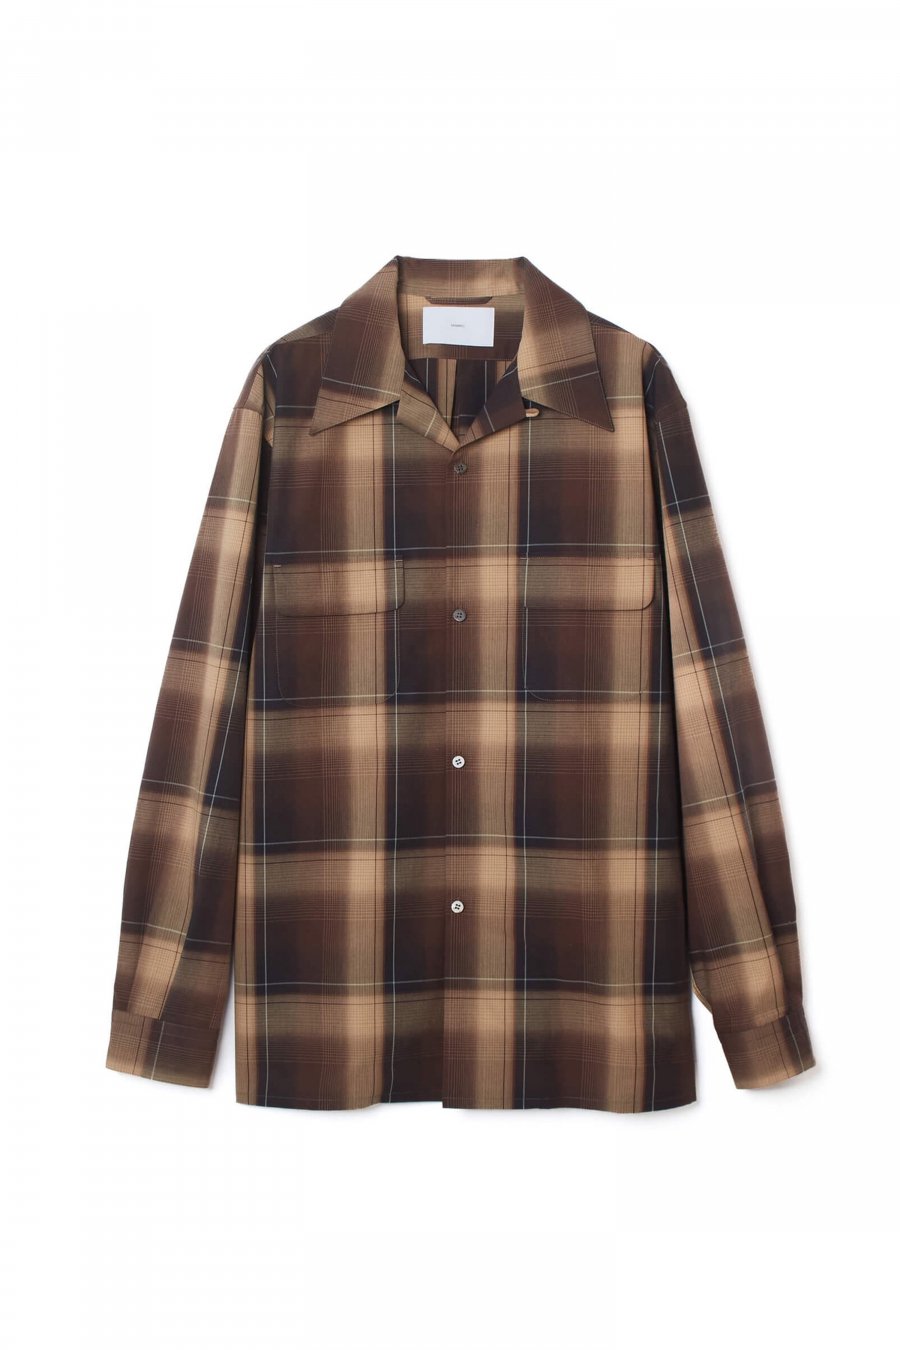 SUGARHILL  OMBRE PLAID OPEN COLLAR BLOUSE(BROWN CAMEL)<img class='new_mark_img2' src='https://img.shop-pro.jp/img/new/icons15.gif' style='border:none;display:inline;margin:0px;padding:0px;width:auto;' />